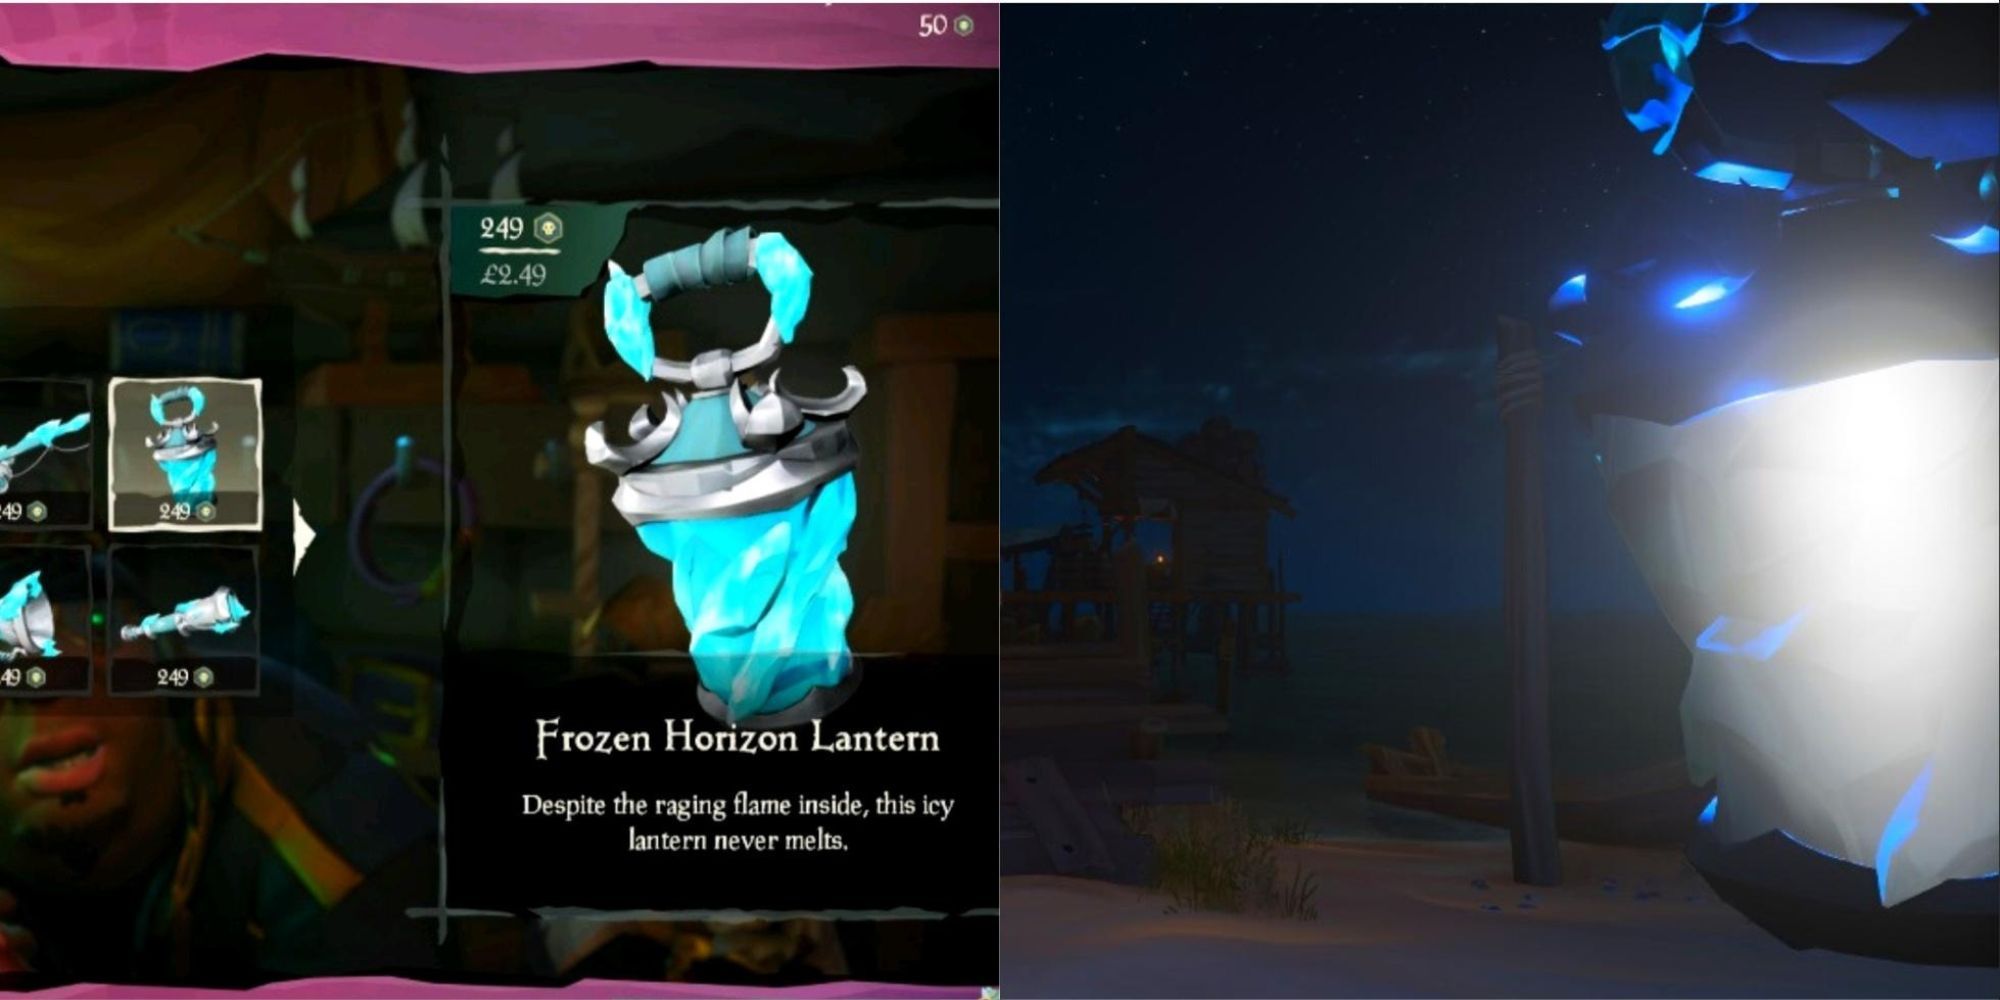 Two images of the Frozen Horizon Lantern in Sea of Thieves, from the equipment shop and in gameplay.